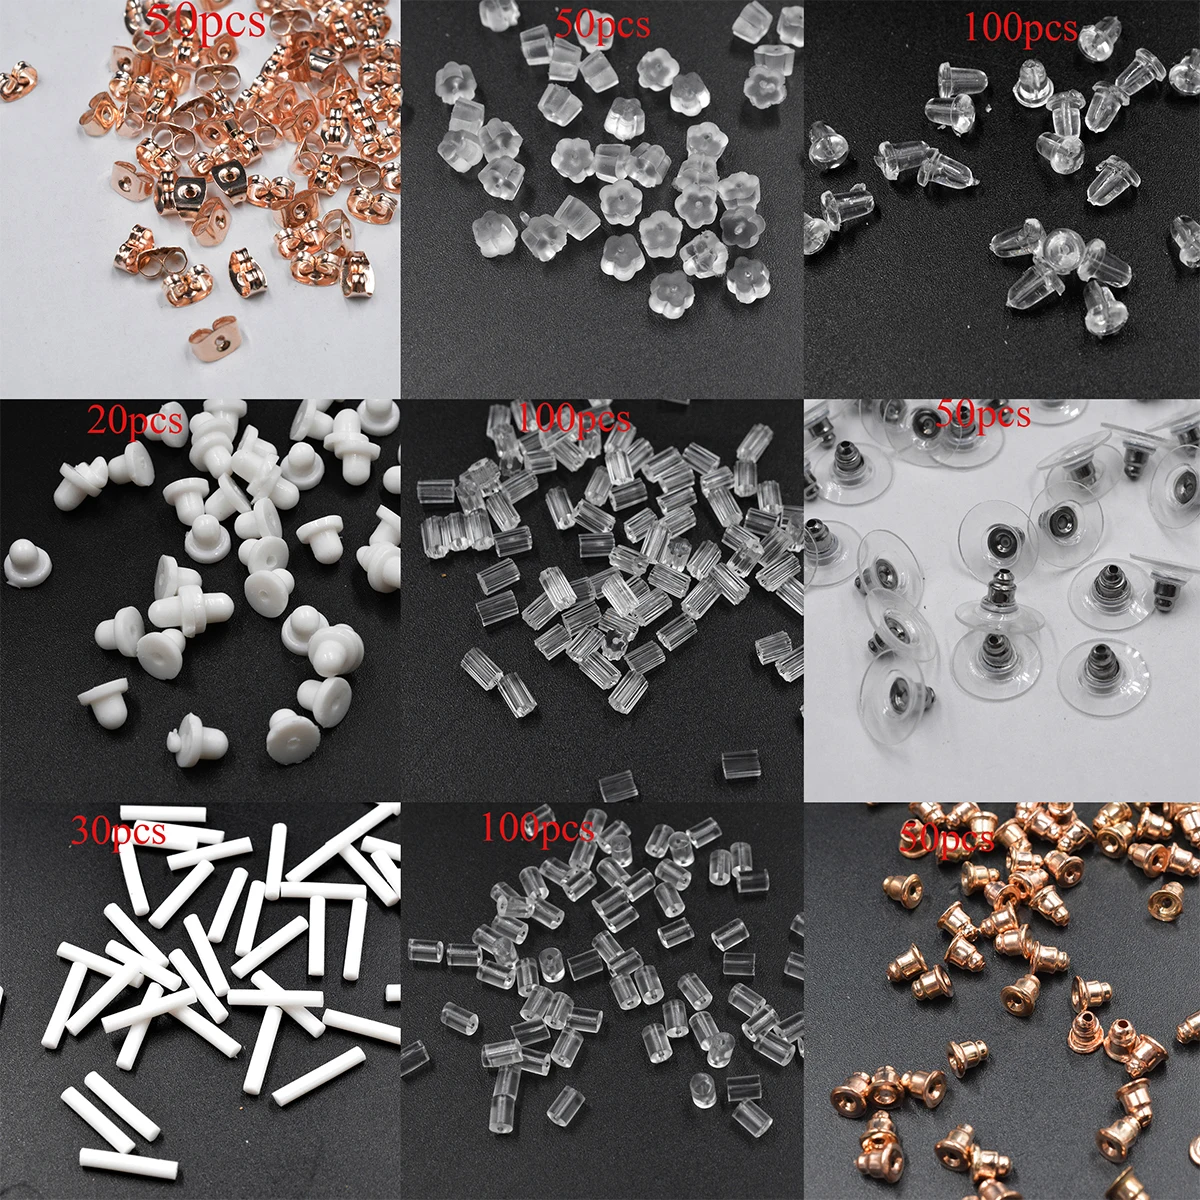 

50pcs/lot Clear Soft Silicone Rubber Earring Backs Safety Bullet Stopper Rubber Jewelry Accessories DIY Parts Ear Plugging